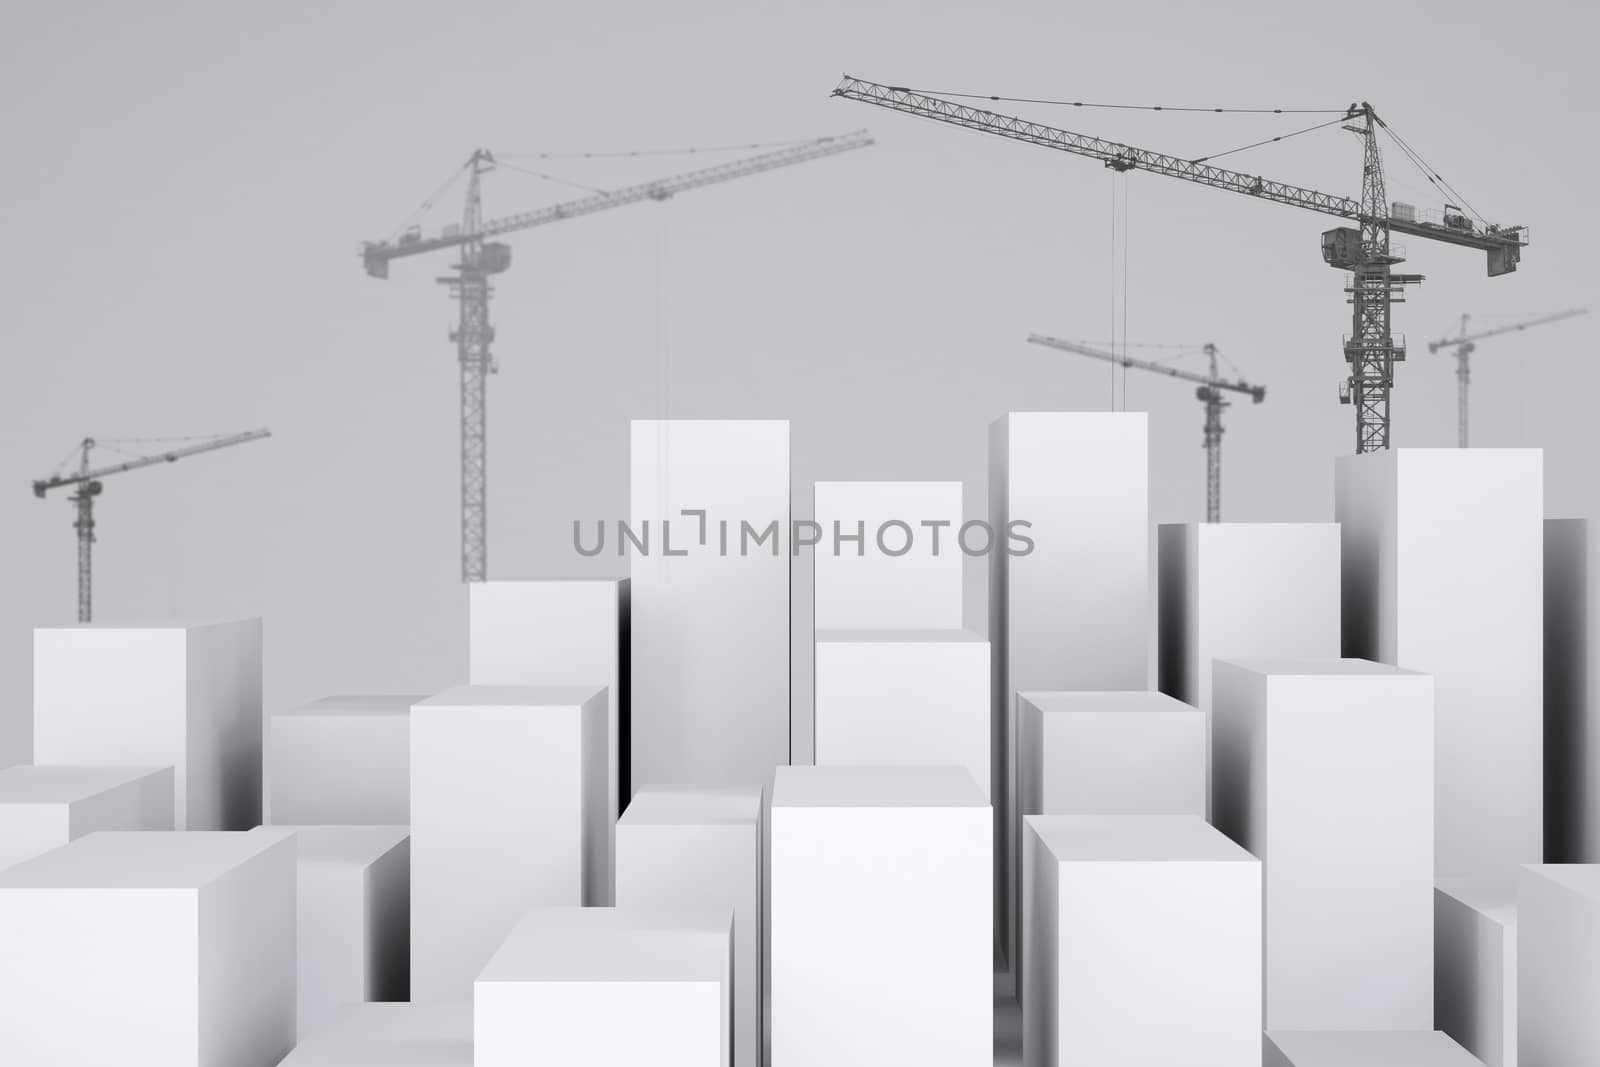 White cubes with wire-frame tower cranes on gray background. Cropped image. Concept of urban construction